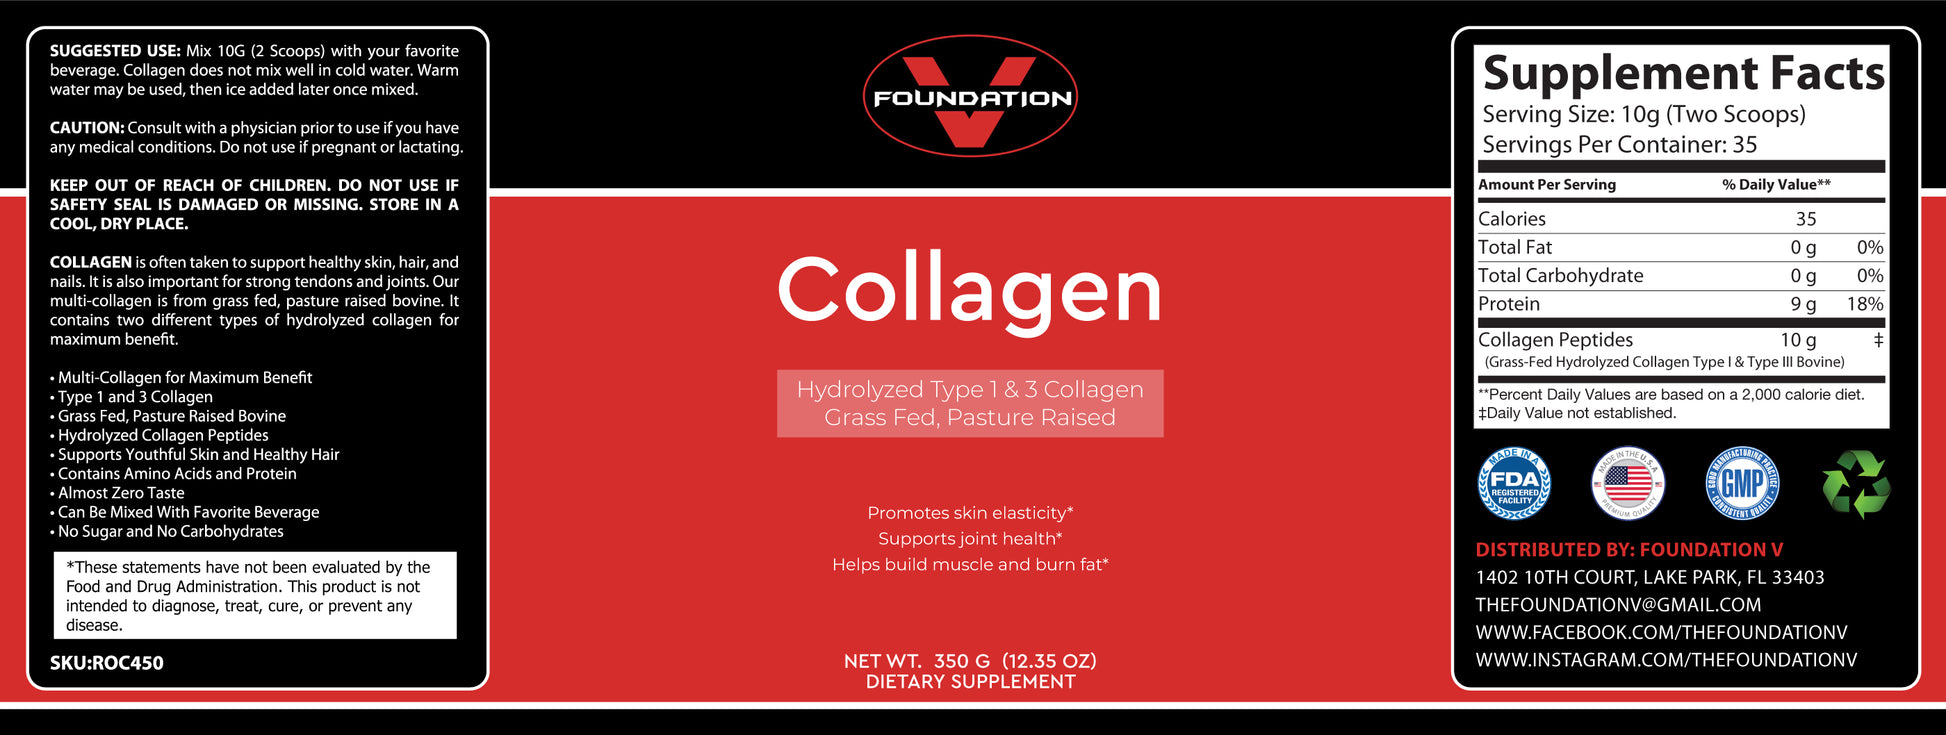 Foundation V supplement Collagen. Multi Collagen Type 1 & 3 sourced from grass-fed, pasture-raised bovine to support age reduction, and unlocking youthful muscle. There are many benefits to using collagen. Quality collagen from foundation V in a potent and natural.